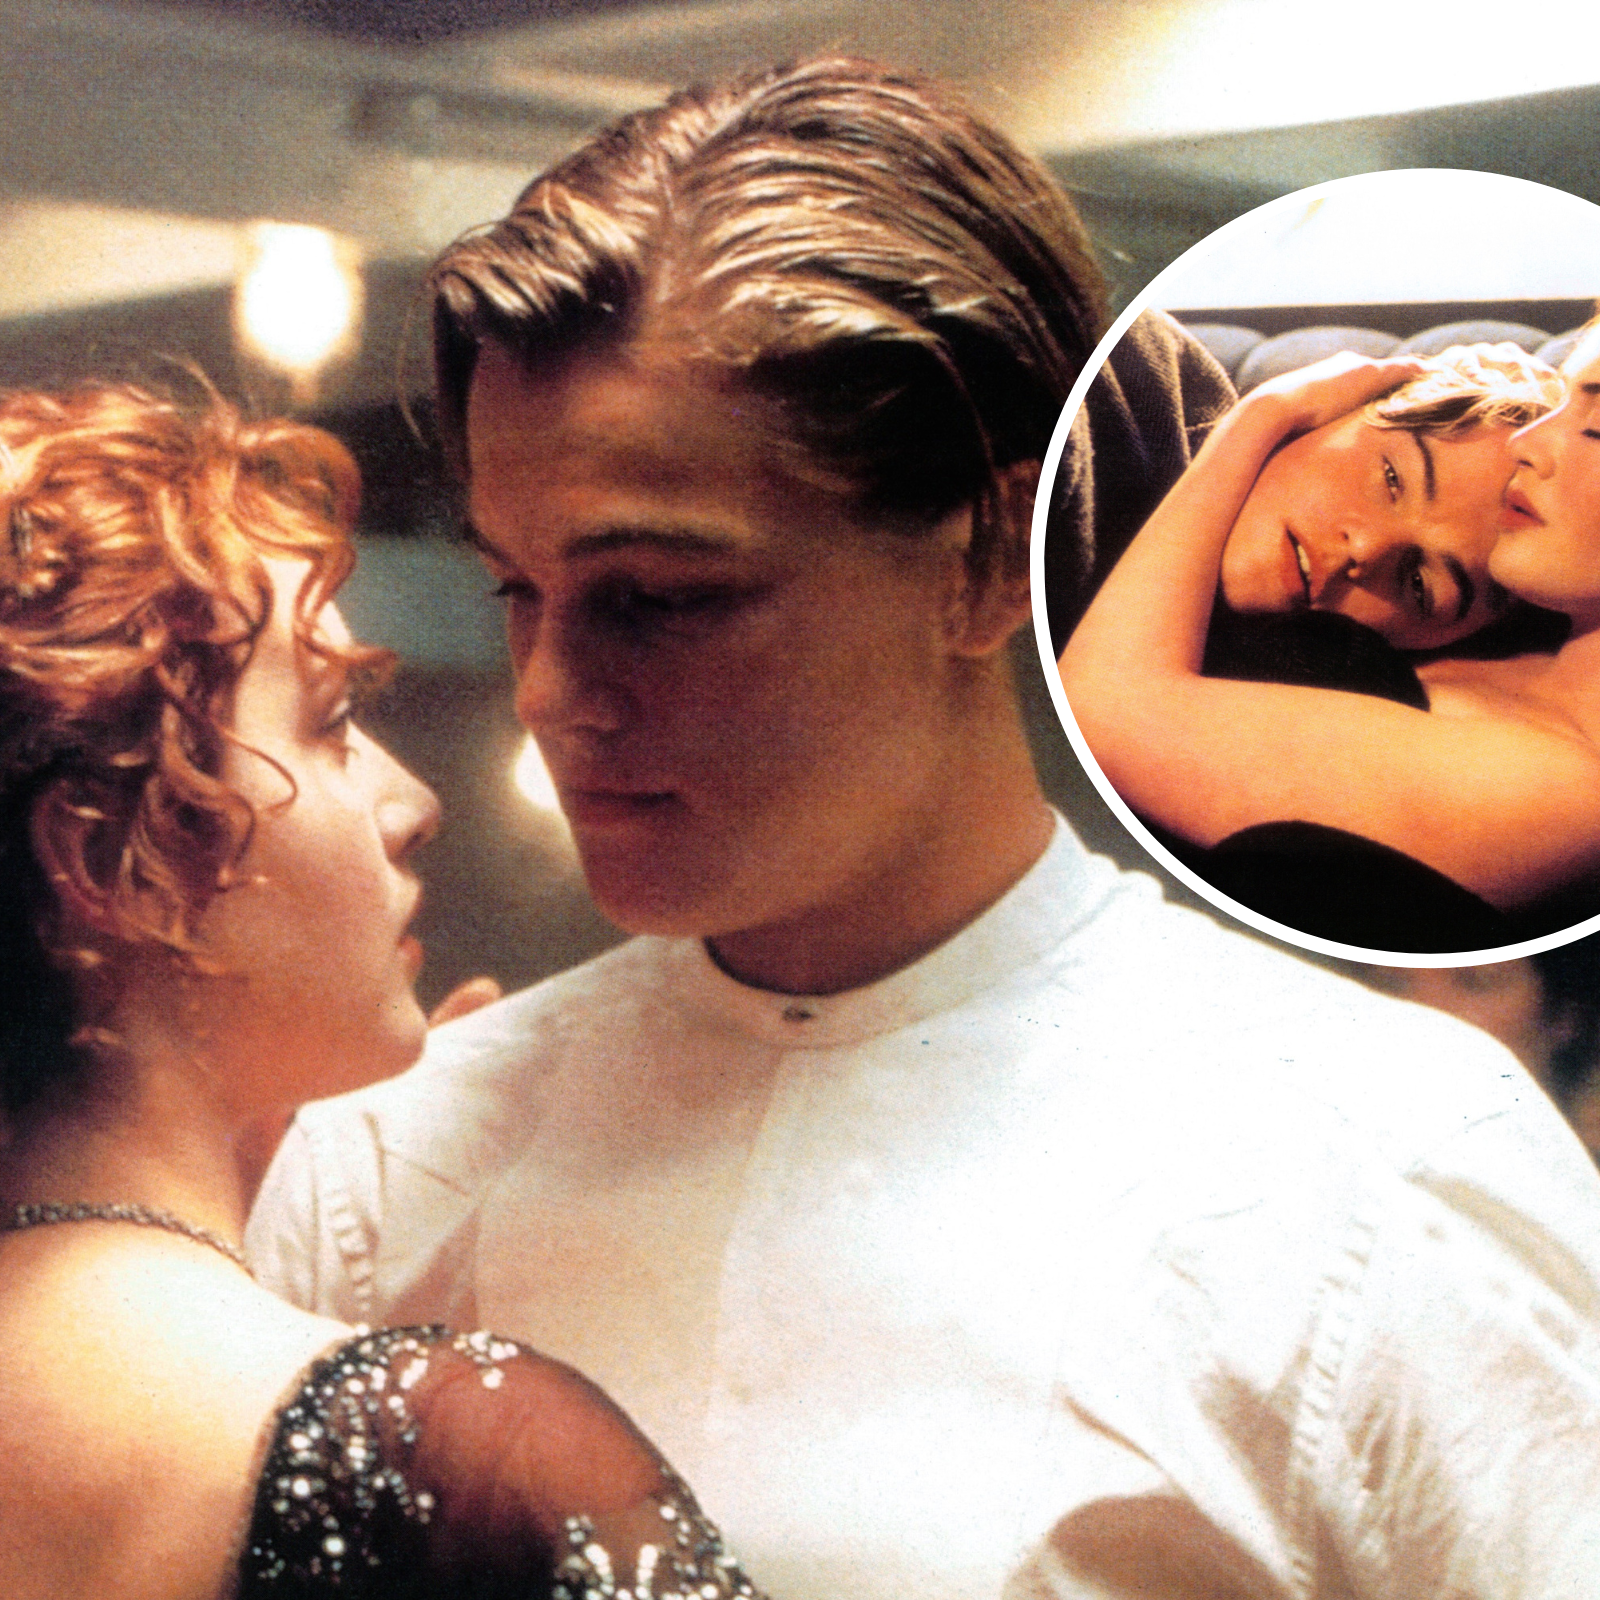 Kate Winslet's Hair on New 'Titanic' Ad Puzzles Fans—'Stressing Me Out'